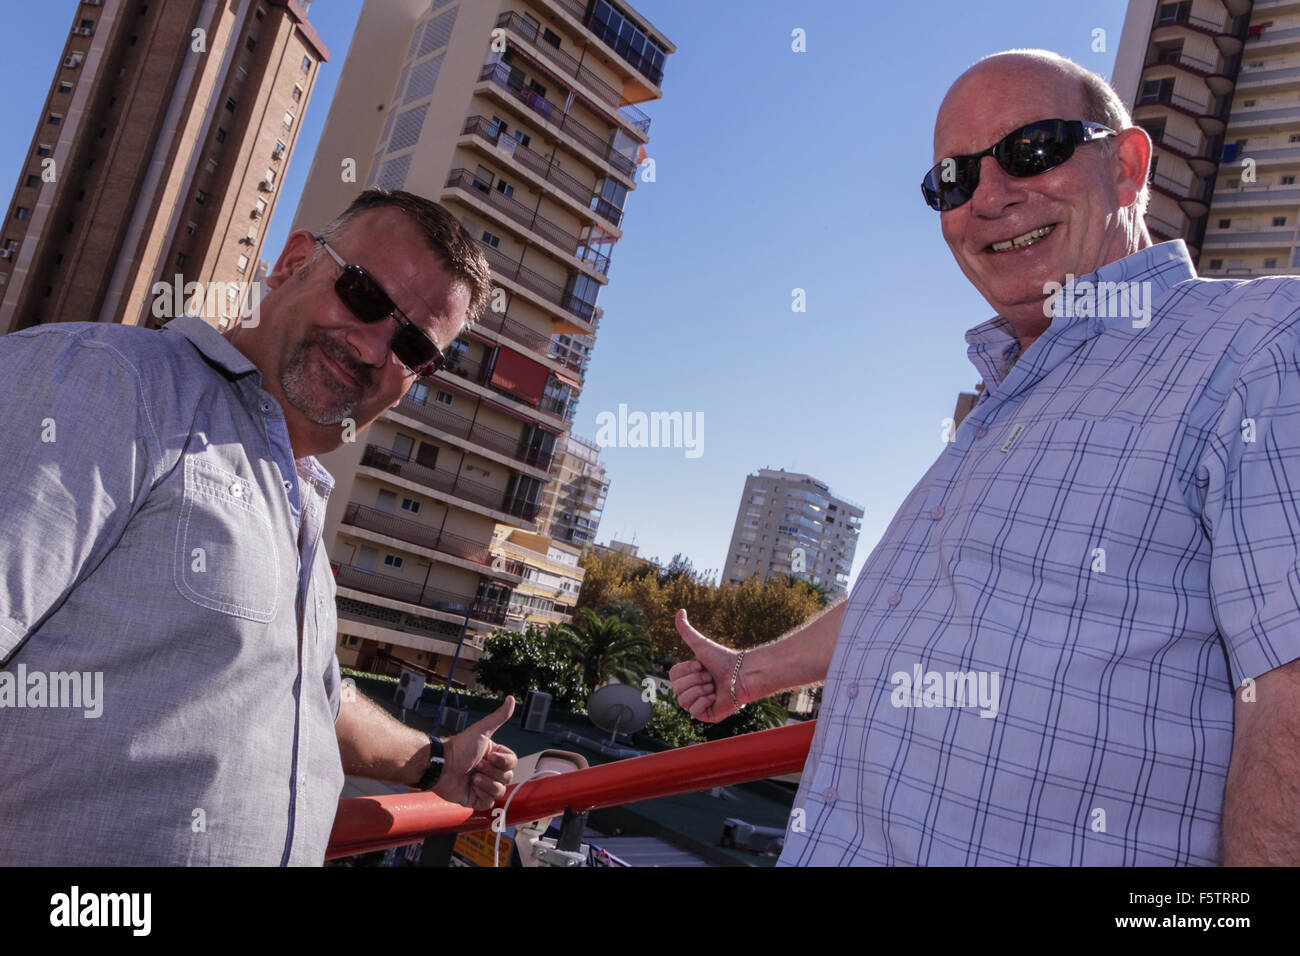 Benidorm, Spain. 9th November, 2015. Darren Duncan from Benidorms Cool FM  radio Station and Barry Pitelen from Benidorm Tourism installing a new  webcam on the prow of the 'ship' at the Marina